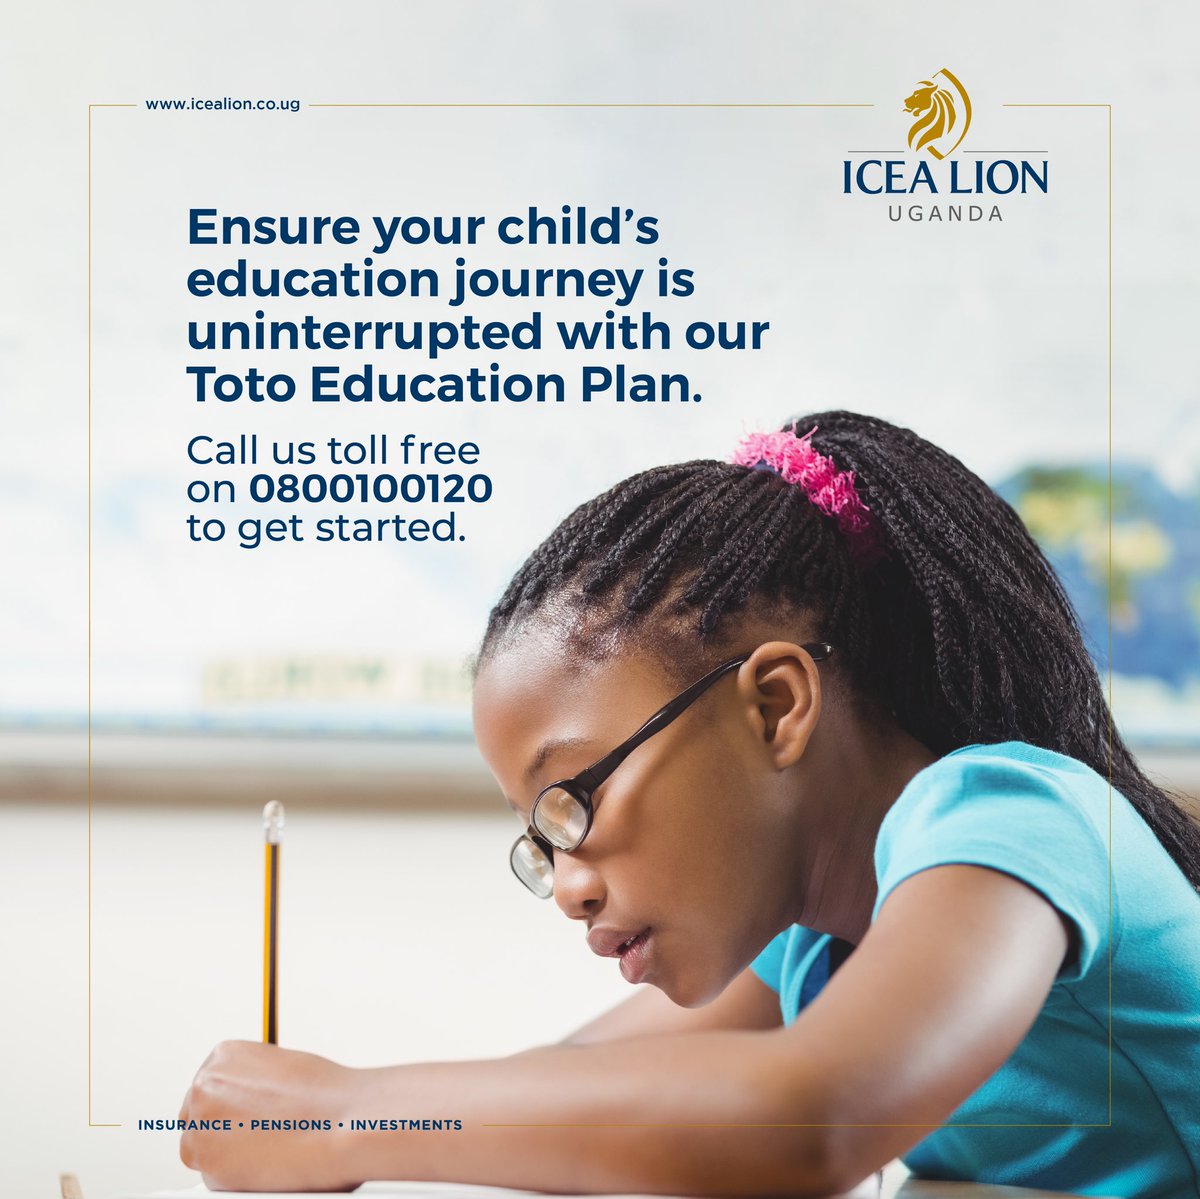 Ensure your child's education journey is uninterrupted with our Toto Education Plan Start today and secure their bright future #ICEALionUg